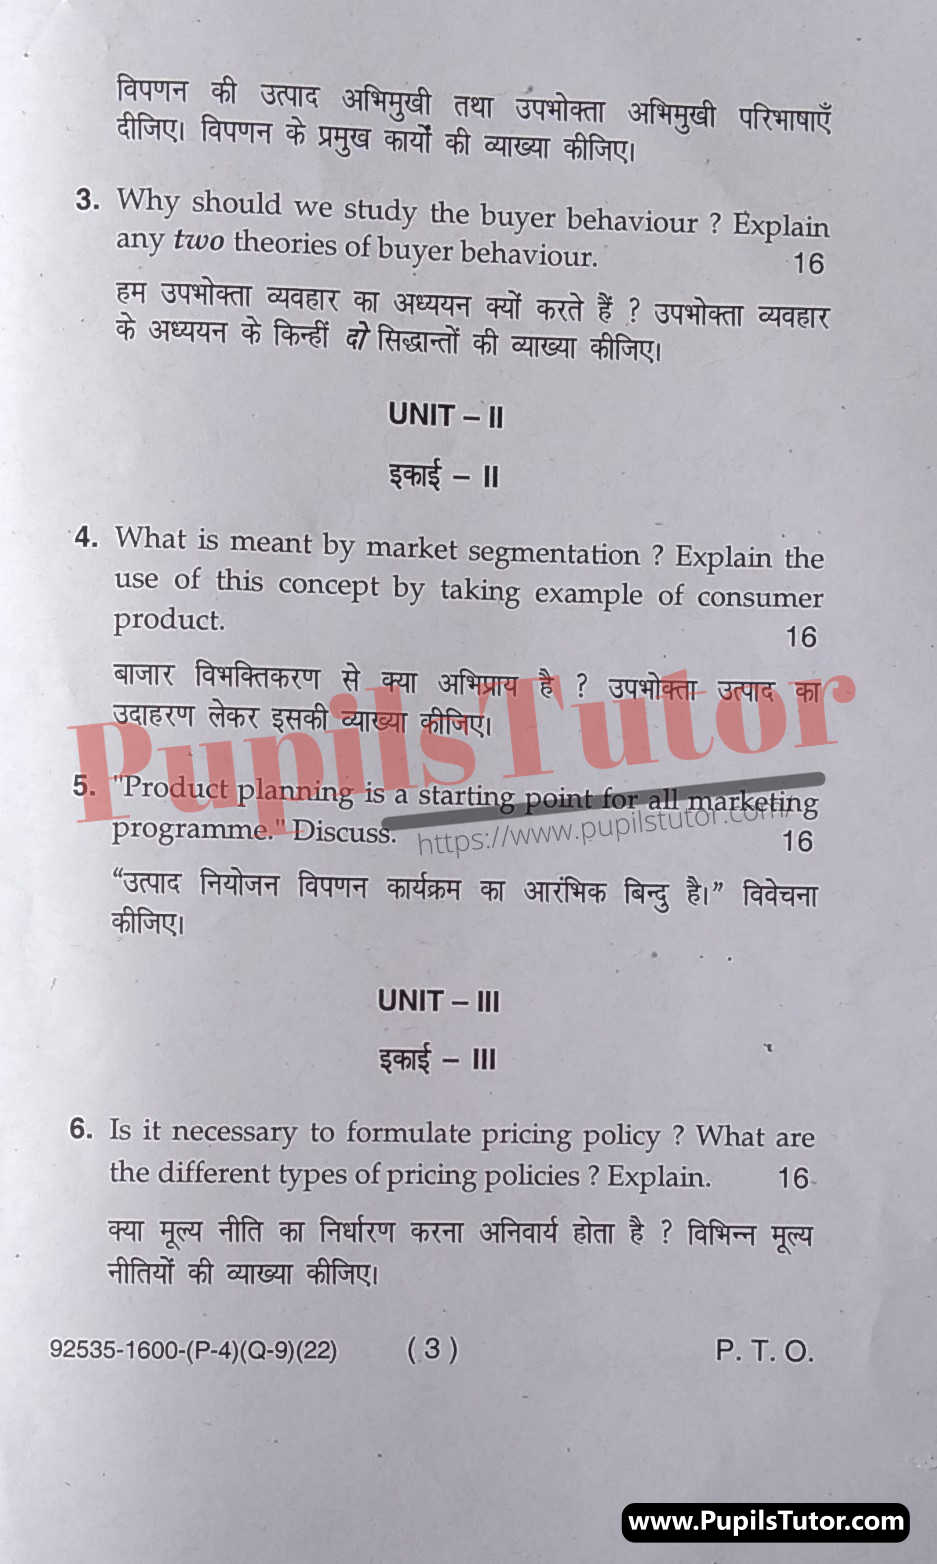 Free Download PDF Of M.D. University B.Com. (Hons.) Third Semester Latest Question Paper For Principles Of Marketing Subject (Page 3) - https://www.pupilstutor.com